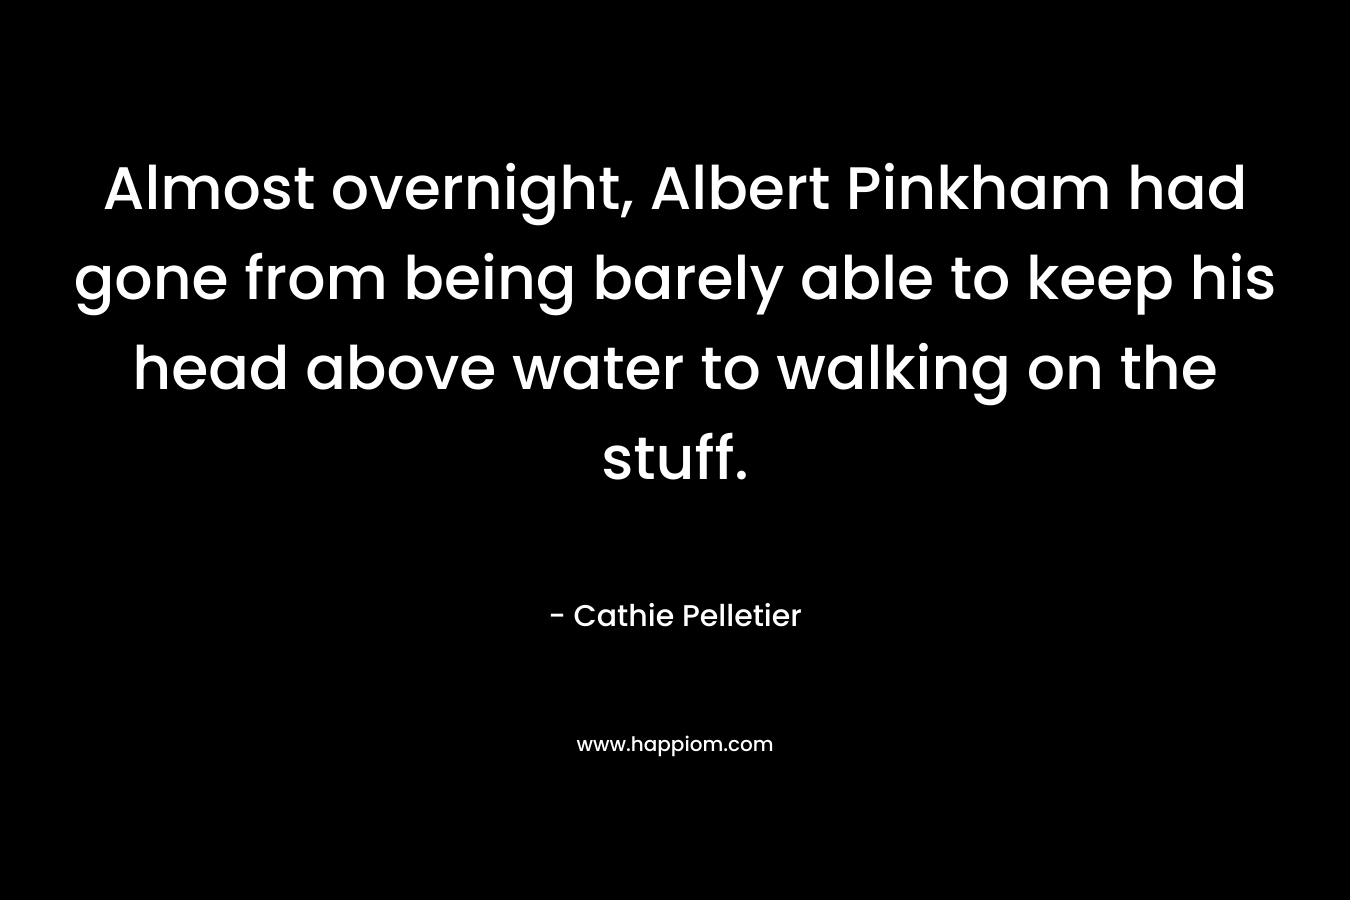 Almost overnight, Albert Pinkham had gone from being barely able to keep his head above water to walking on the stuff. – Cathie Pelletier